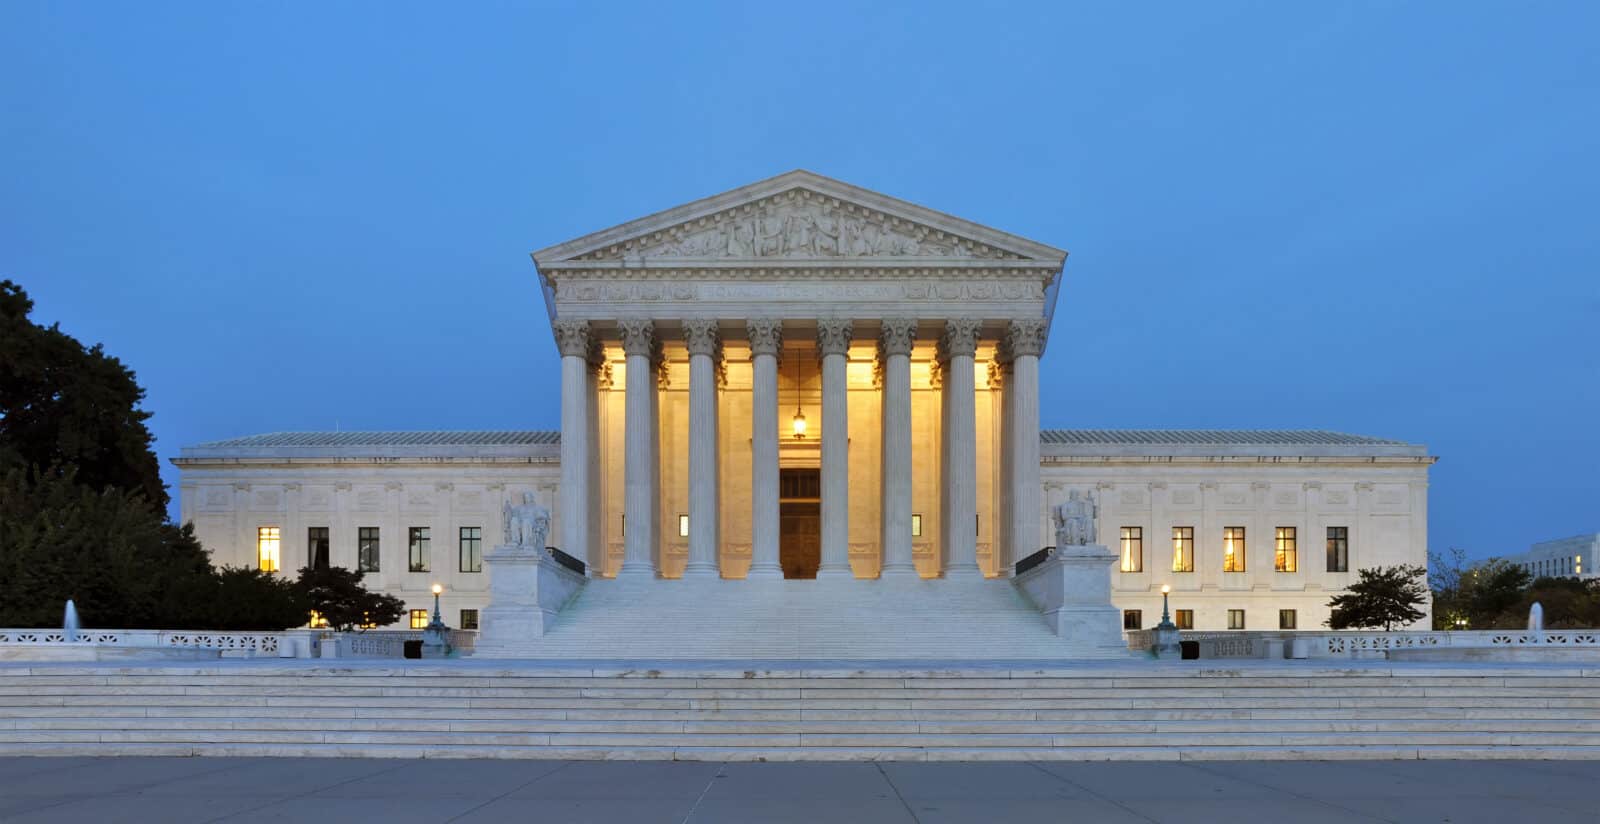 Panorama of United States Supreme Court Building at Dusk A recent lawsuit filed in the United States District Court of Utah has brought internal conflicts at Gala Games to light. Co-founders Eric Schiermeyer and Wright Thurston filed lawsuits against each other on August 31, 2023., with accusations of theft of Gala tokens from the company. The tokens are essential to the Gala Games ecosystem and are used for in-game purchases and as a medium of player exchange. The lawsuit seeks disbursement or restitution of the stolen cryptocurrency, compensation for the damage caused to Gala Games, and the removal of Thurston as a director. It also highlights Thurston's history of involvement in multiple companies that have faced litigation, insolvency, or bankruptcy.